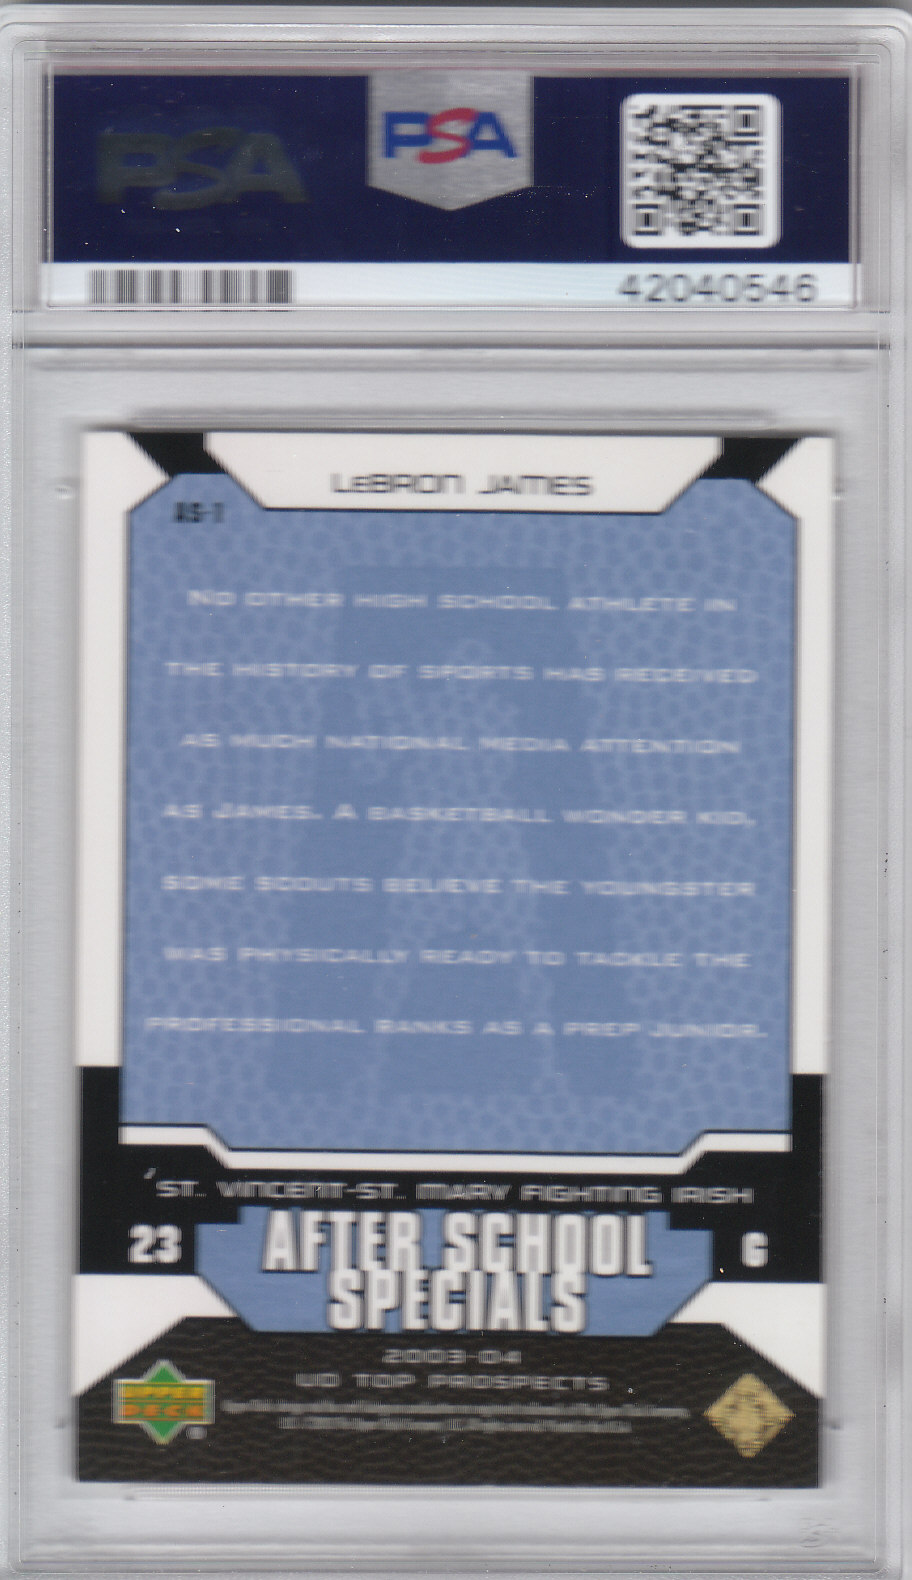 2003-04 UD Top Prospects After School Specials #AS1 LeBron James back image